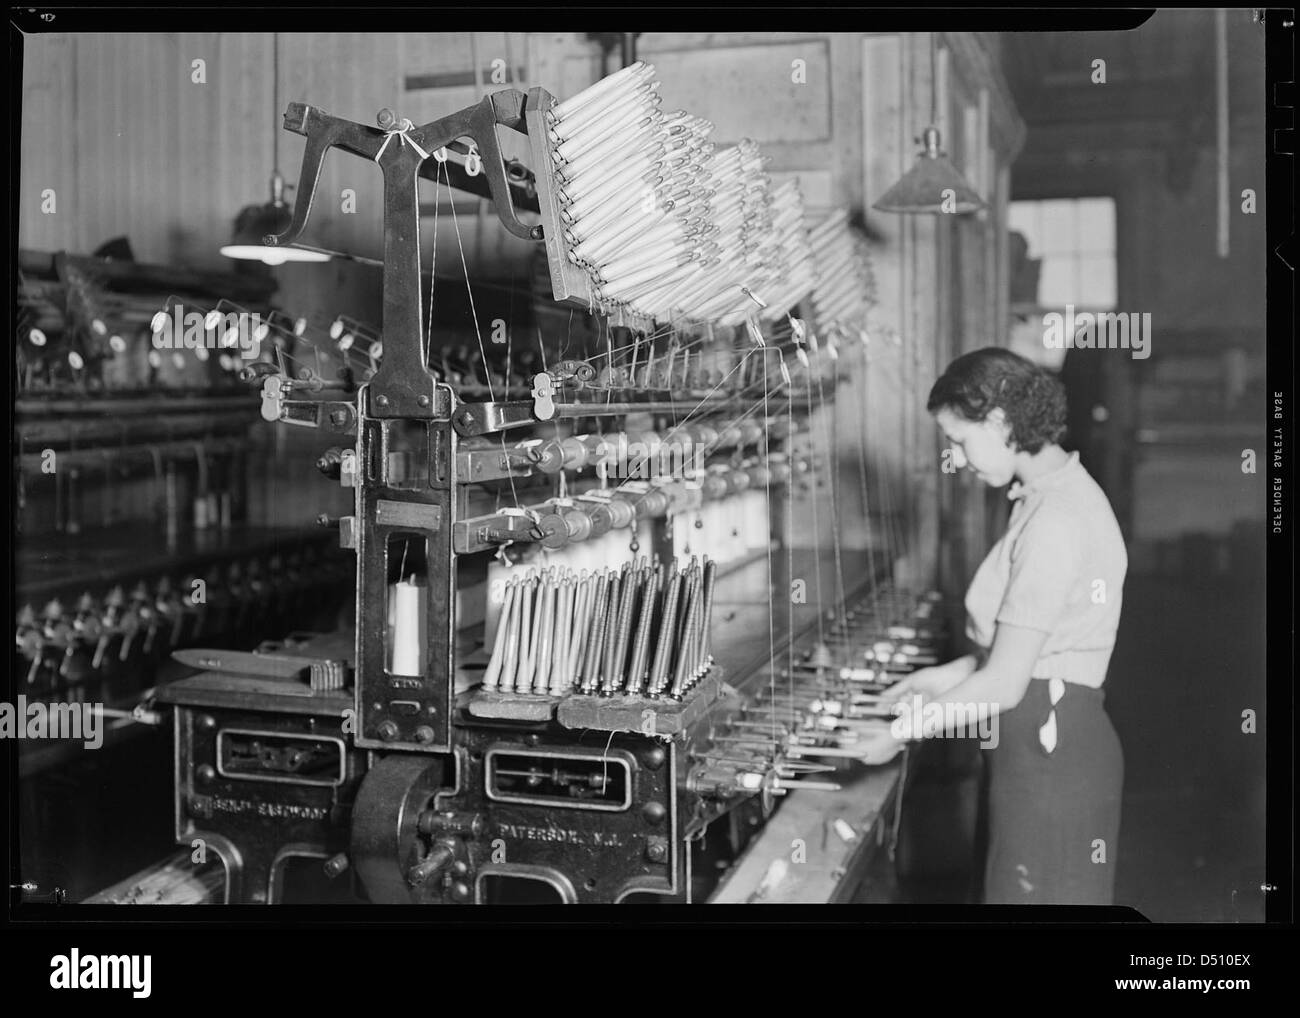 Quilling. The thread is wound from the cones, seen in an upright position on the table of the machine, on to the quills soon at the position of the operator's hands, 1936 Stock Photo